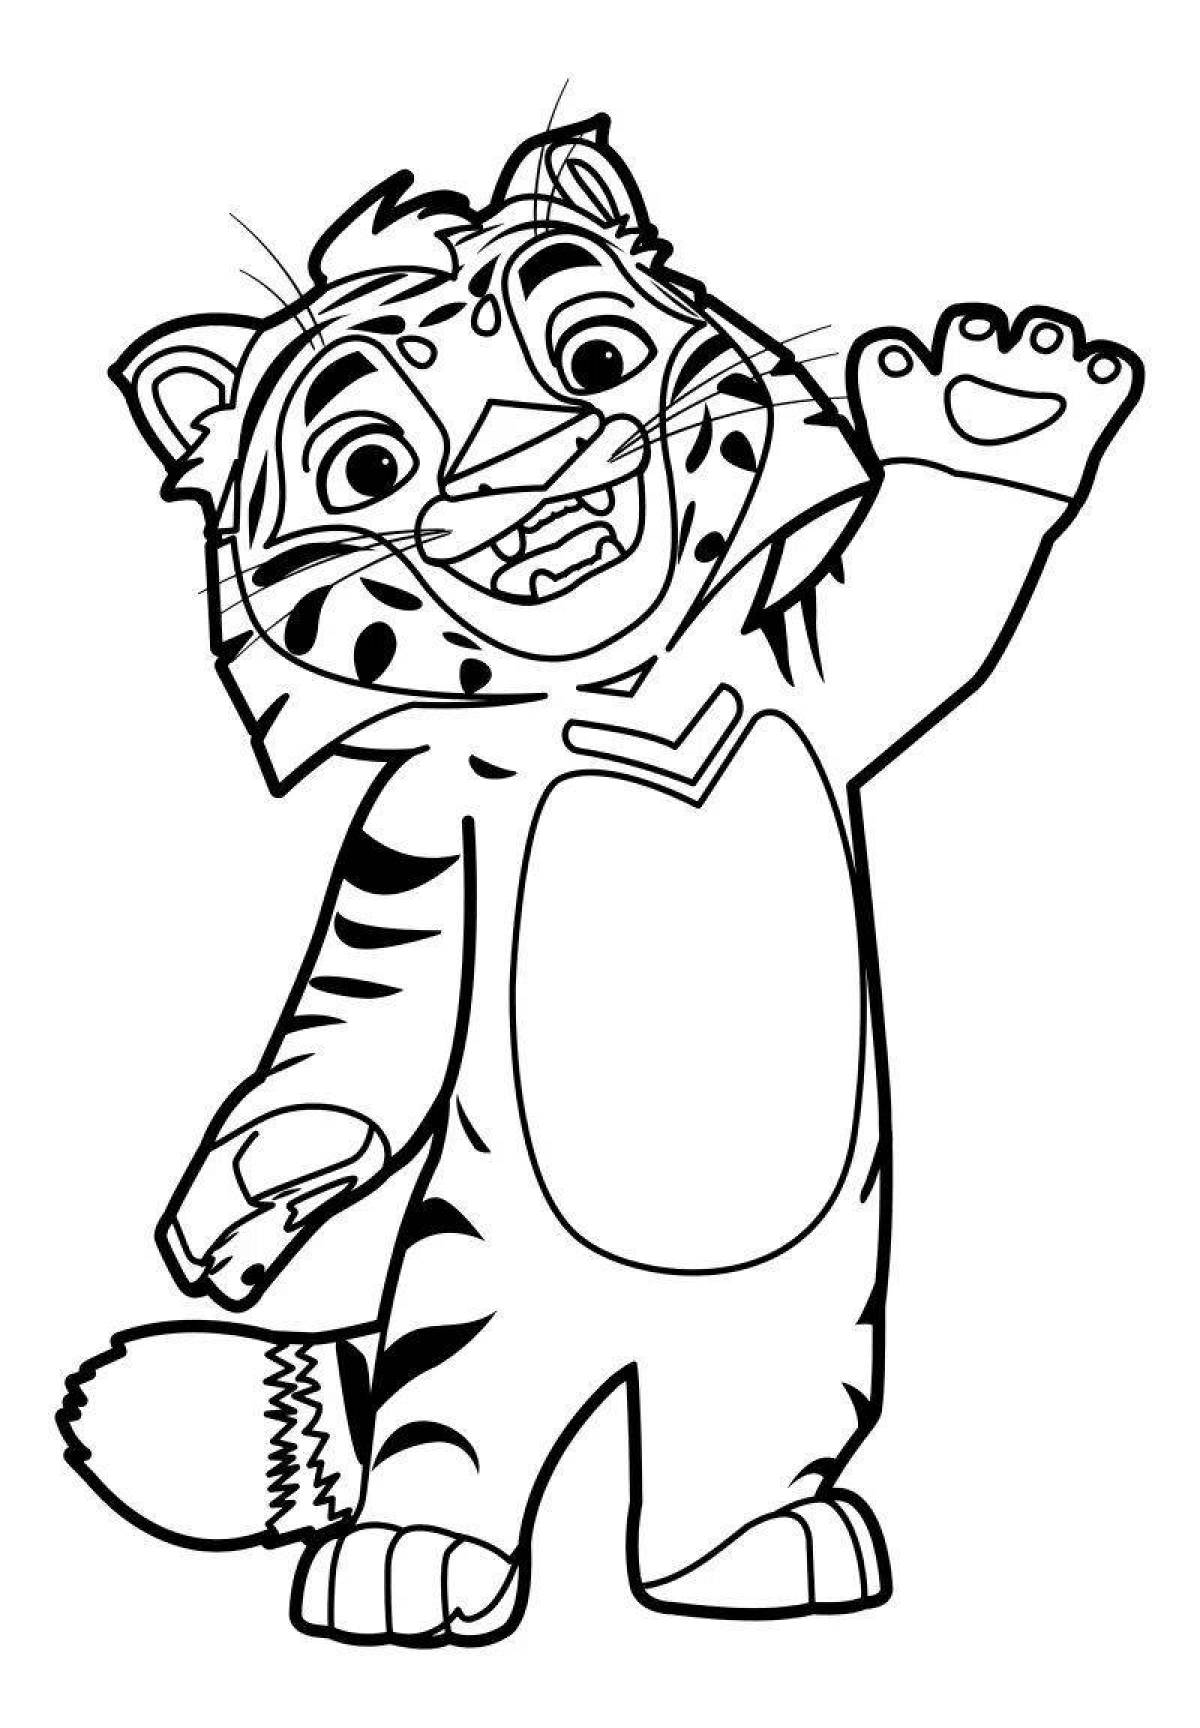 Amazing tiger and lion coloring page